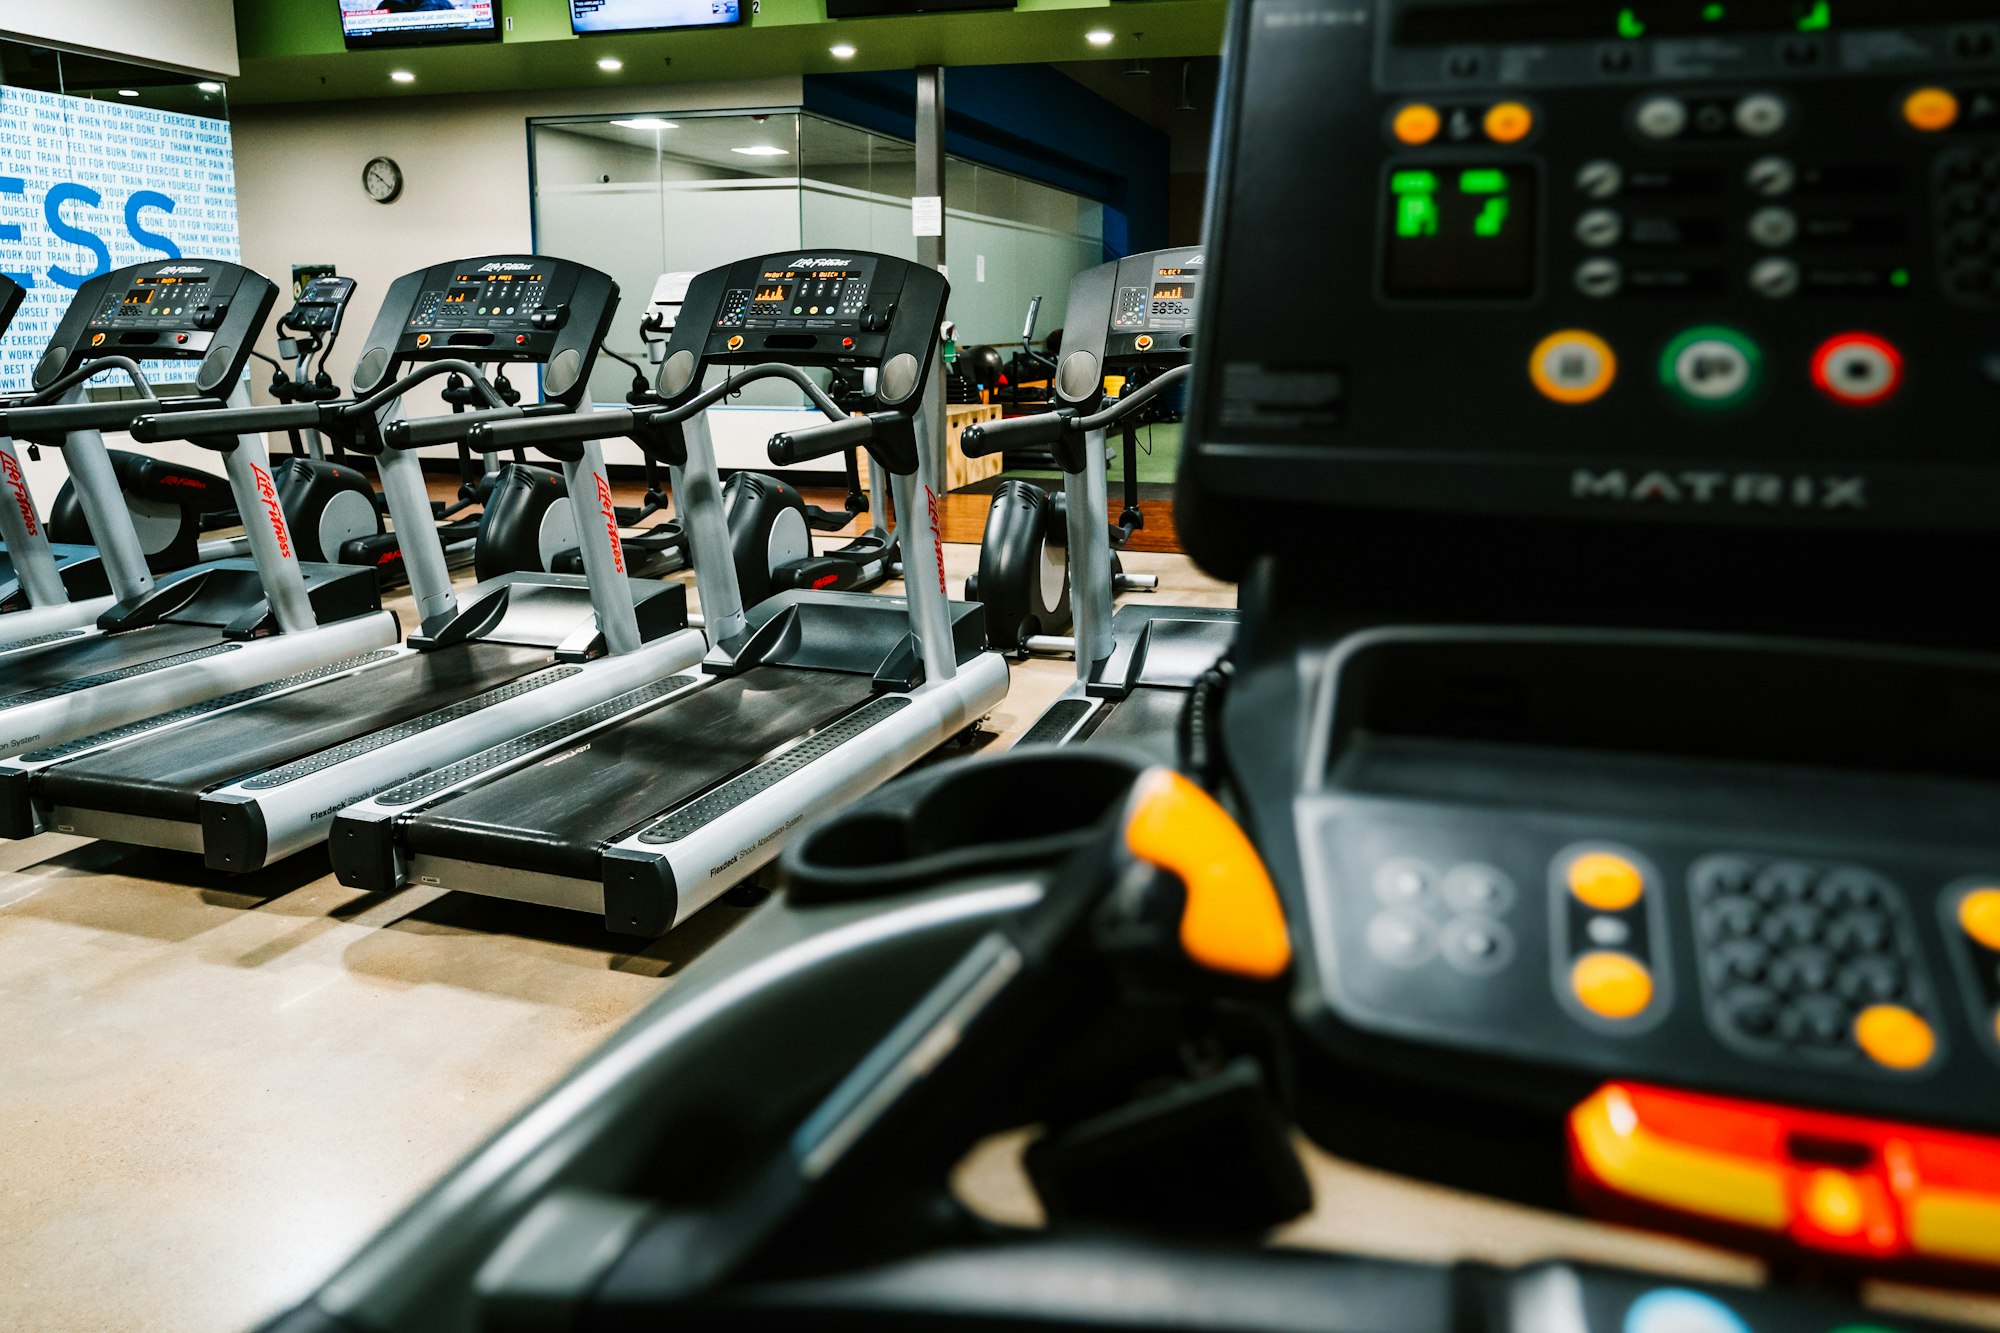 Elliptical, Treadmill, or StairMaster: Which is Better for Weight Loss?